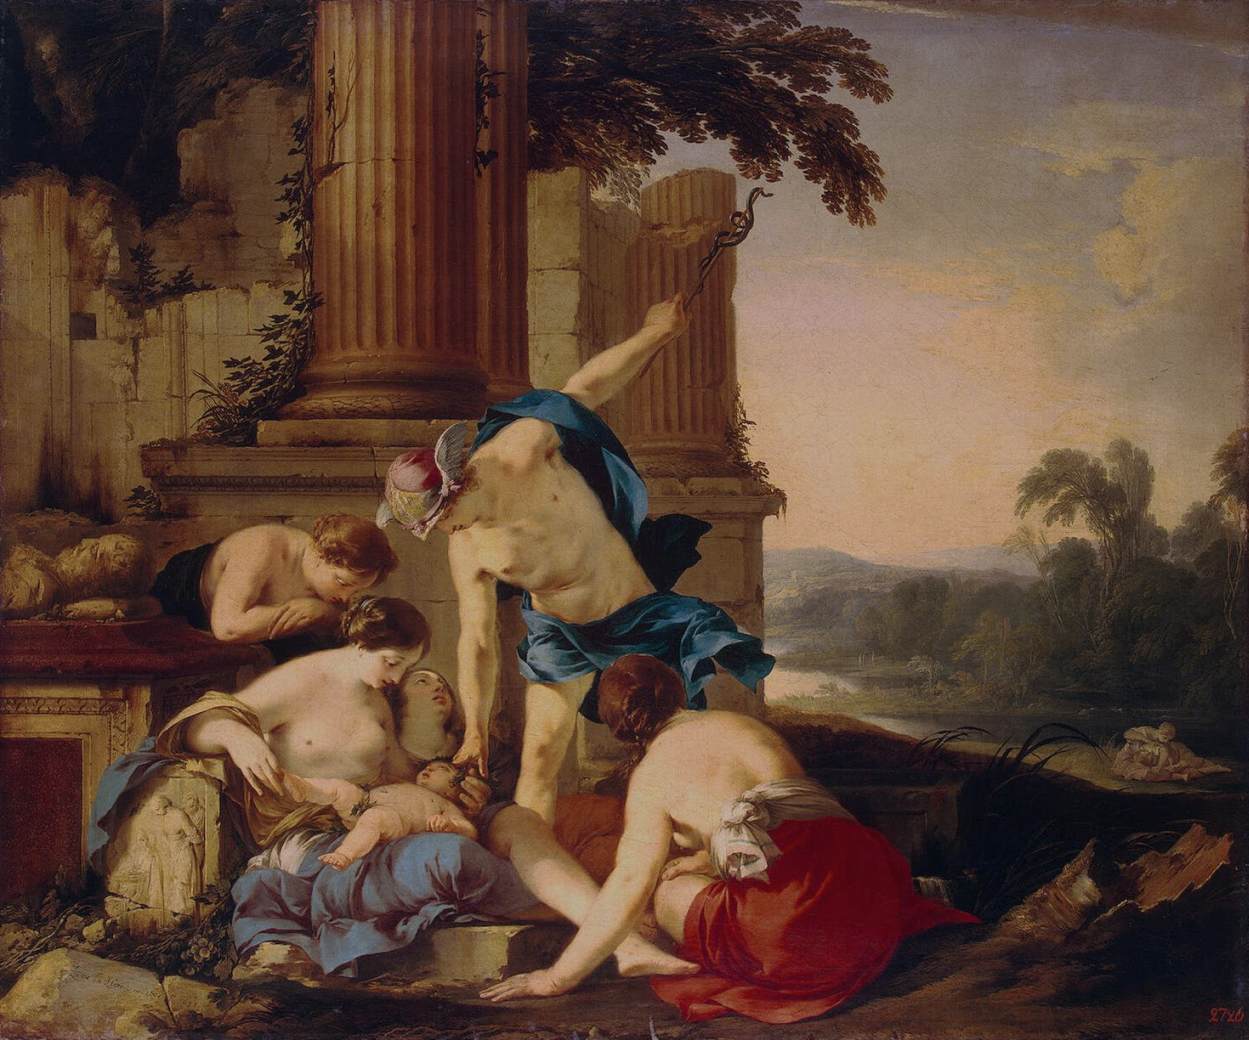 Mercury Leads Bacchus to be Raised by Nymphs